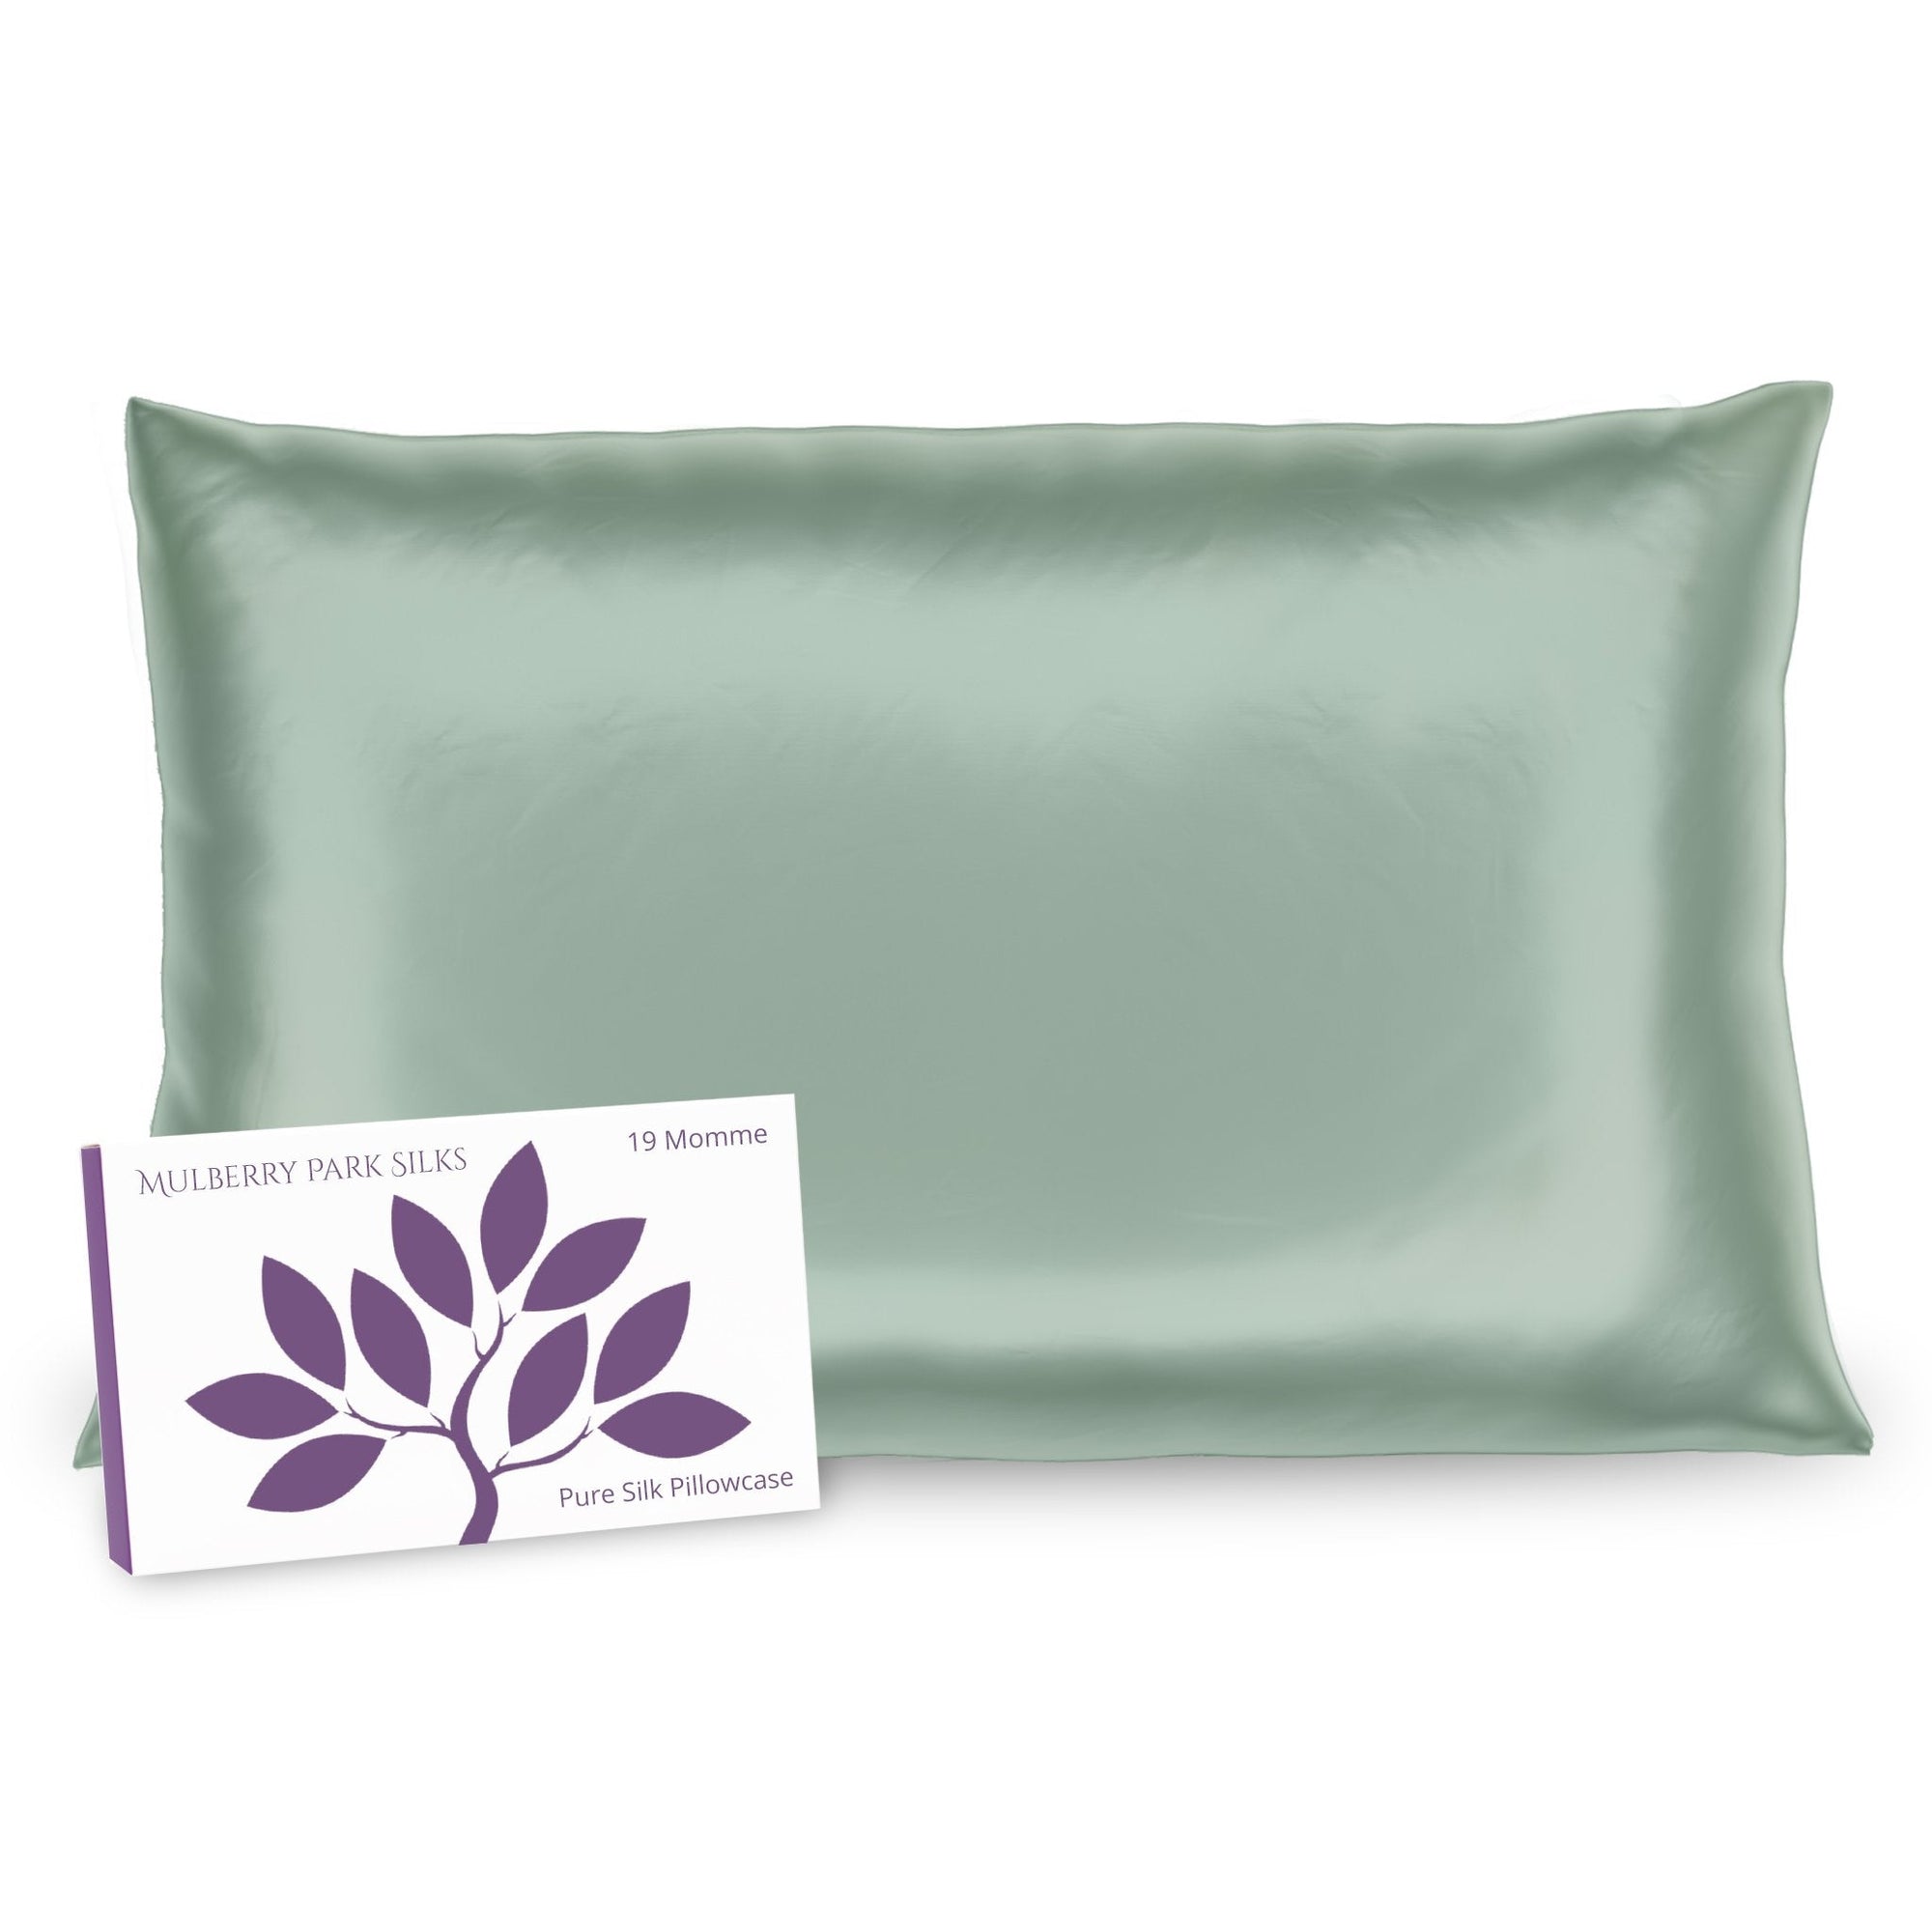 Mulberry Park Silks 19 Momme Pillowcase Green with box packaging